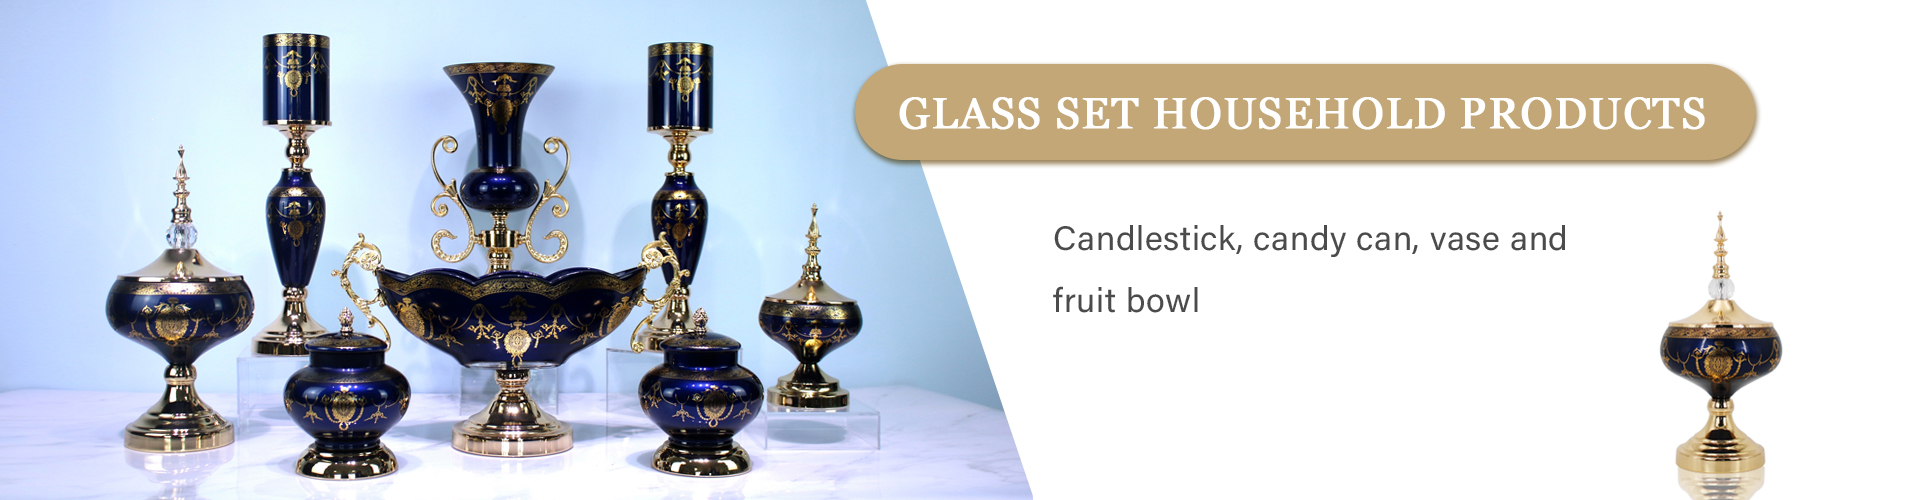 Candle Holder, Home Decotation, Candy Pot